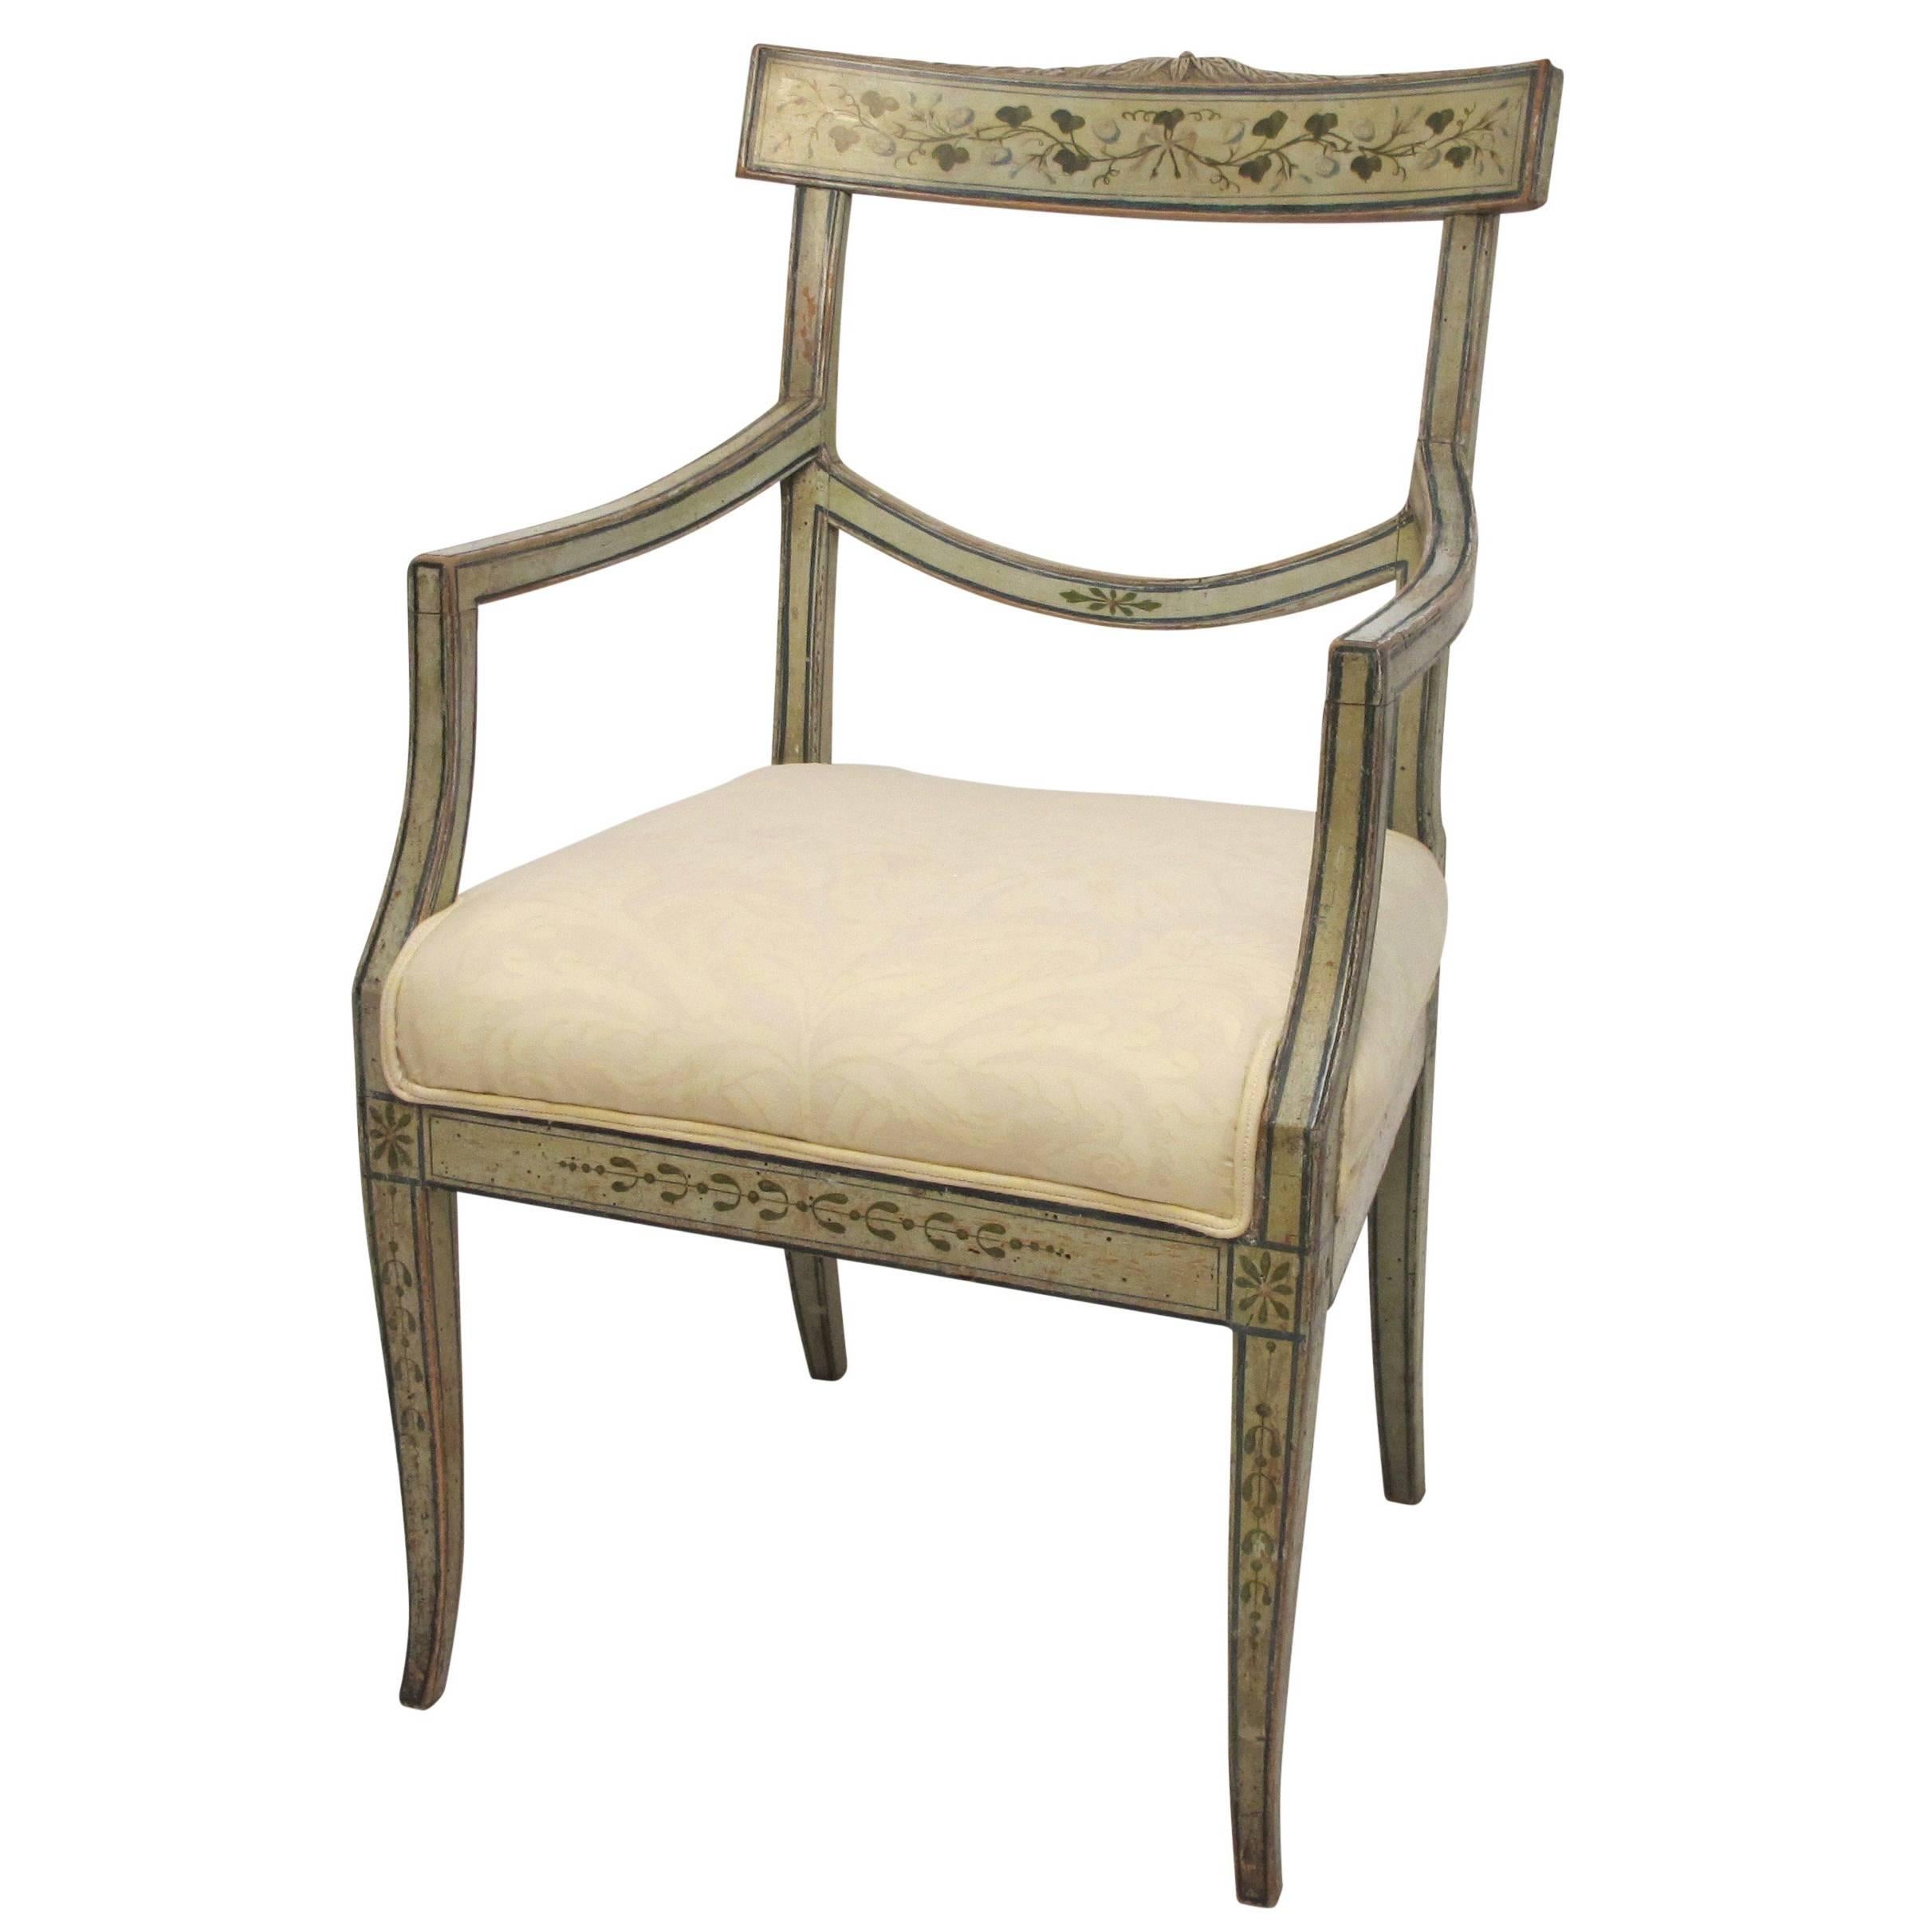 Swedish Green Painted Armchair with Vintage Fortuny Upholstery, 19th Century